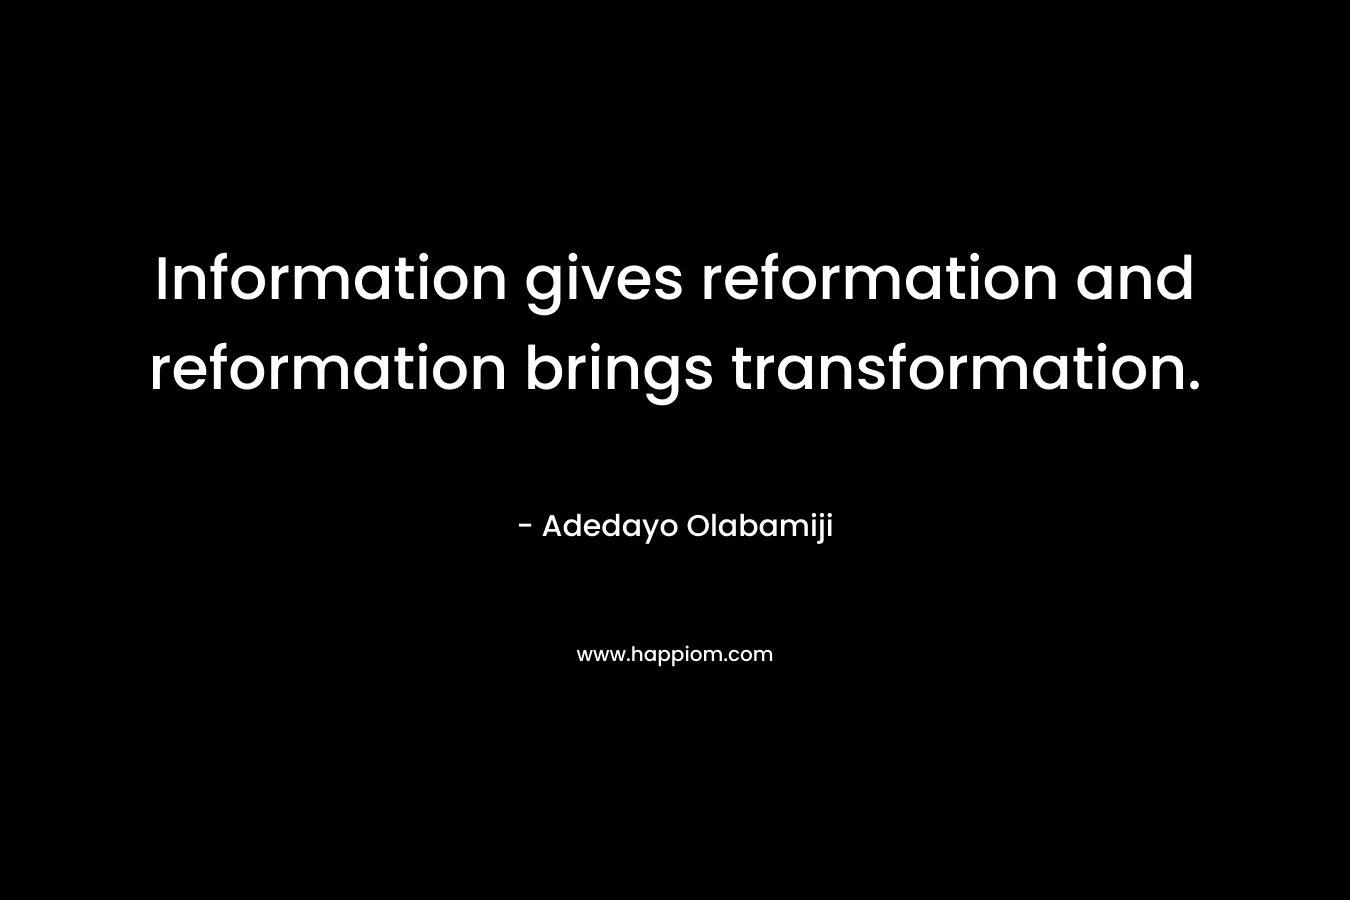 Information gives reformation and reformation brings transformation.